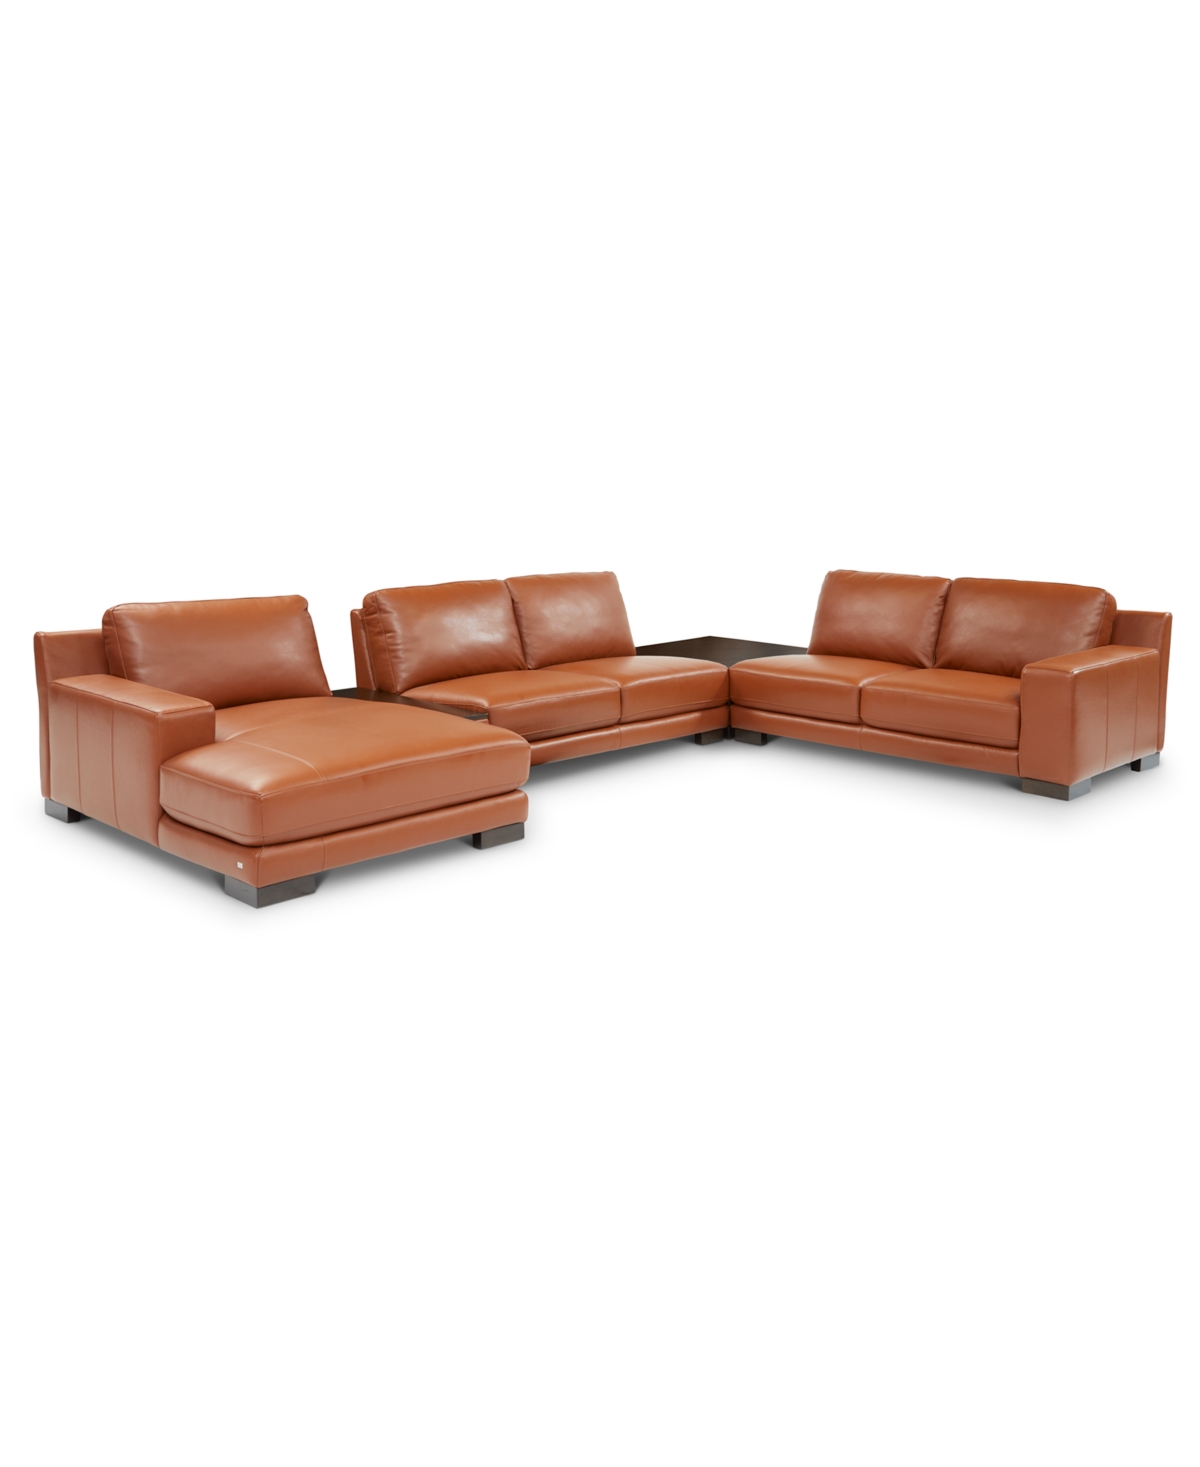 Macy's Darrium 5-pc. Leather Chaise Sectional With Corner Table & Console, Created For  In Cognac